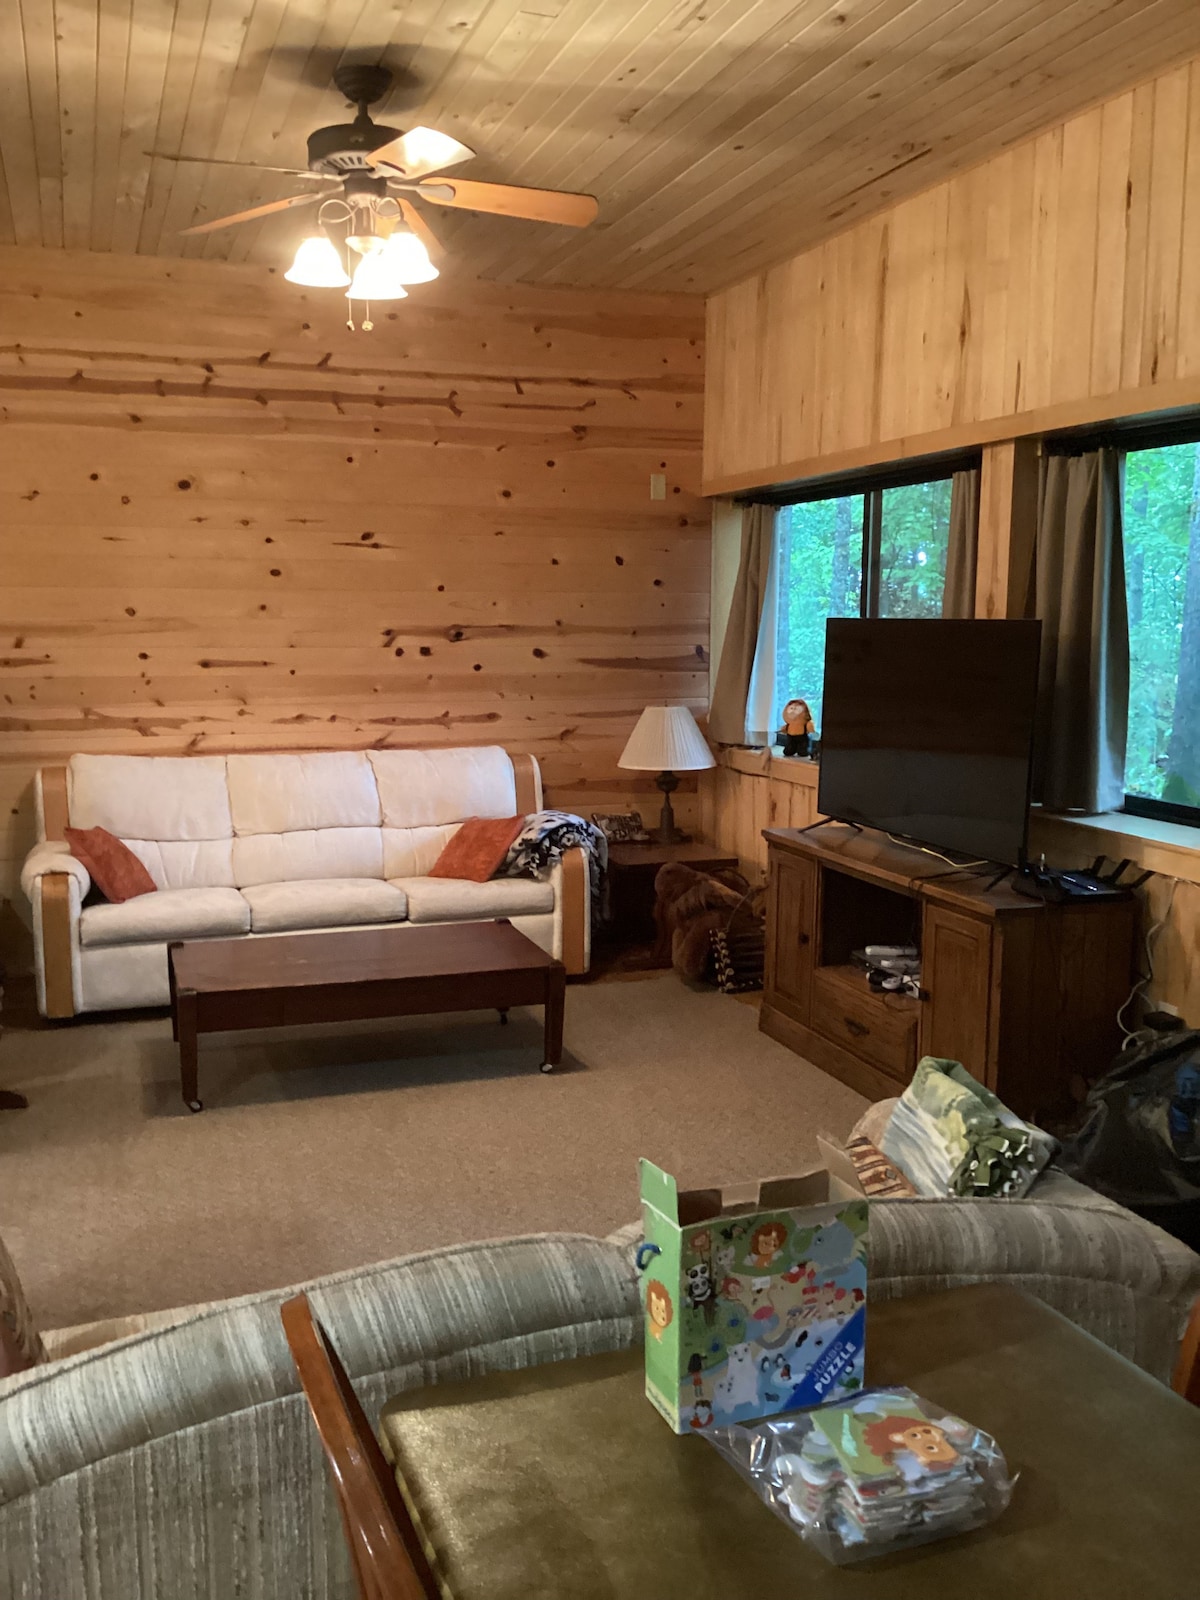 The Lodge: A Large 3-Bedroom Cabin on Moose Lake